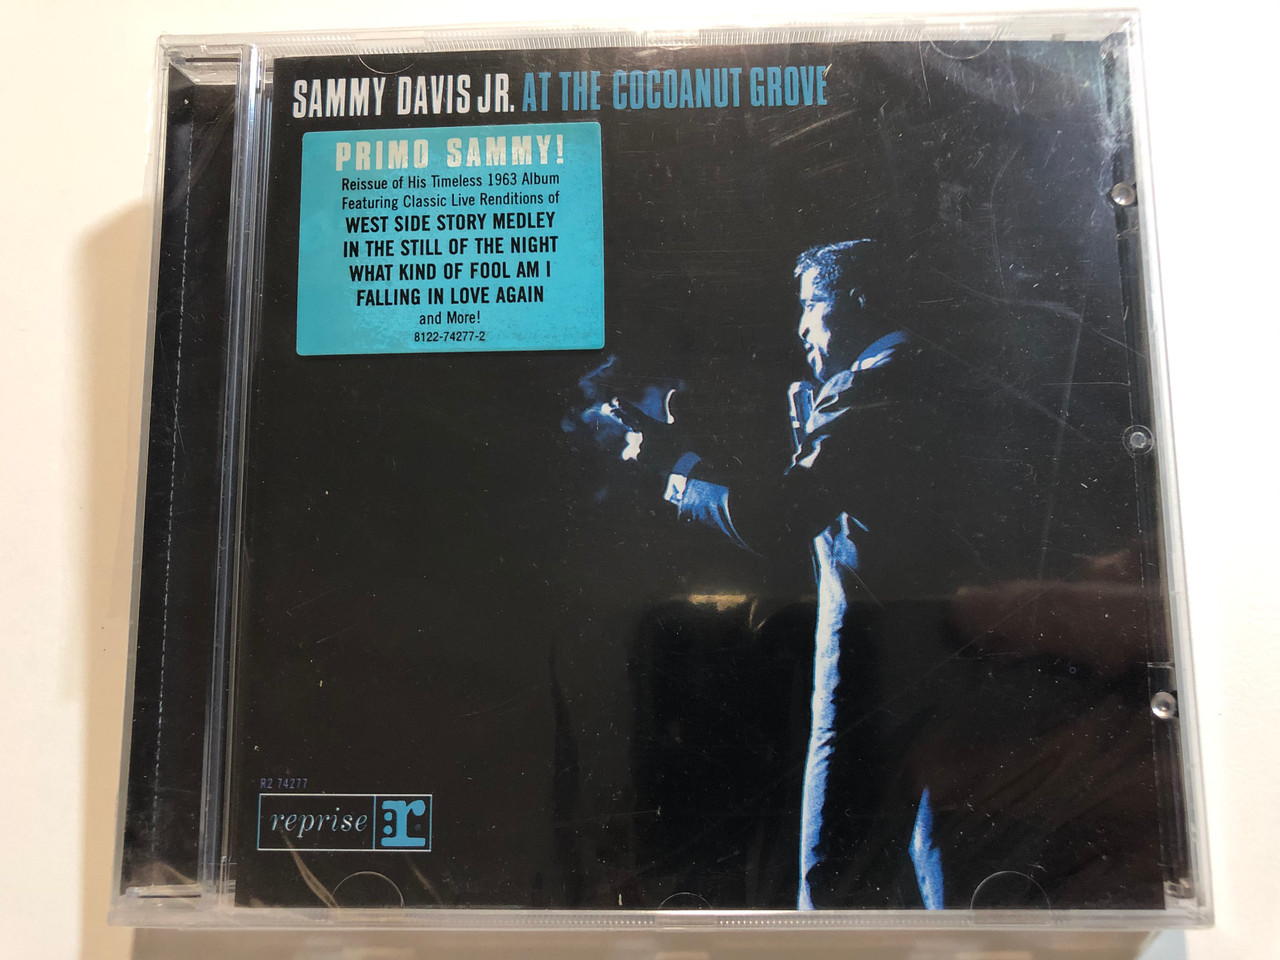 https://cdn10.bigcommerce.com/s-62bdpkt7pb/products/29363/images/175156/Sammy_Davis_Jr._At_The_Cocoanut_Grove_Reissue_of_Hits_Timeless_1963_Album_Featuring_Classic_Live_Renditations_of_West_Side_Story_Medley_In_The_Still_Of_The_Night_What_Kind_Of_Fool_Am_I_1__54194.1618429221.1280.1280.JPG?c=2&_ga=2.138964720.2106526039.1618490327-95516592.1618490327